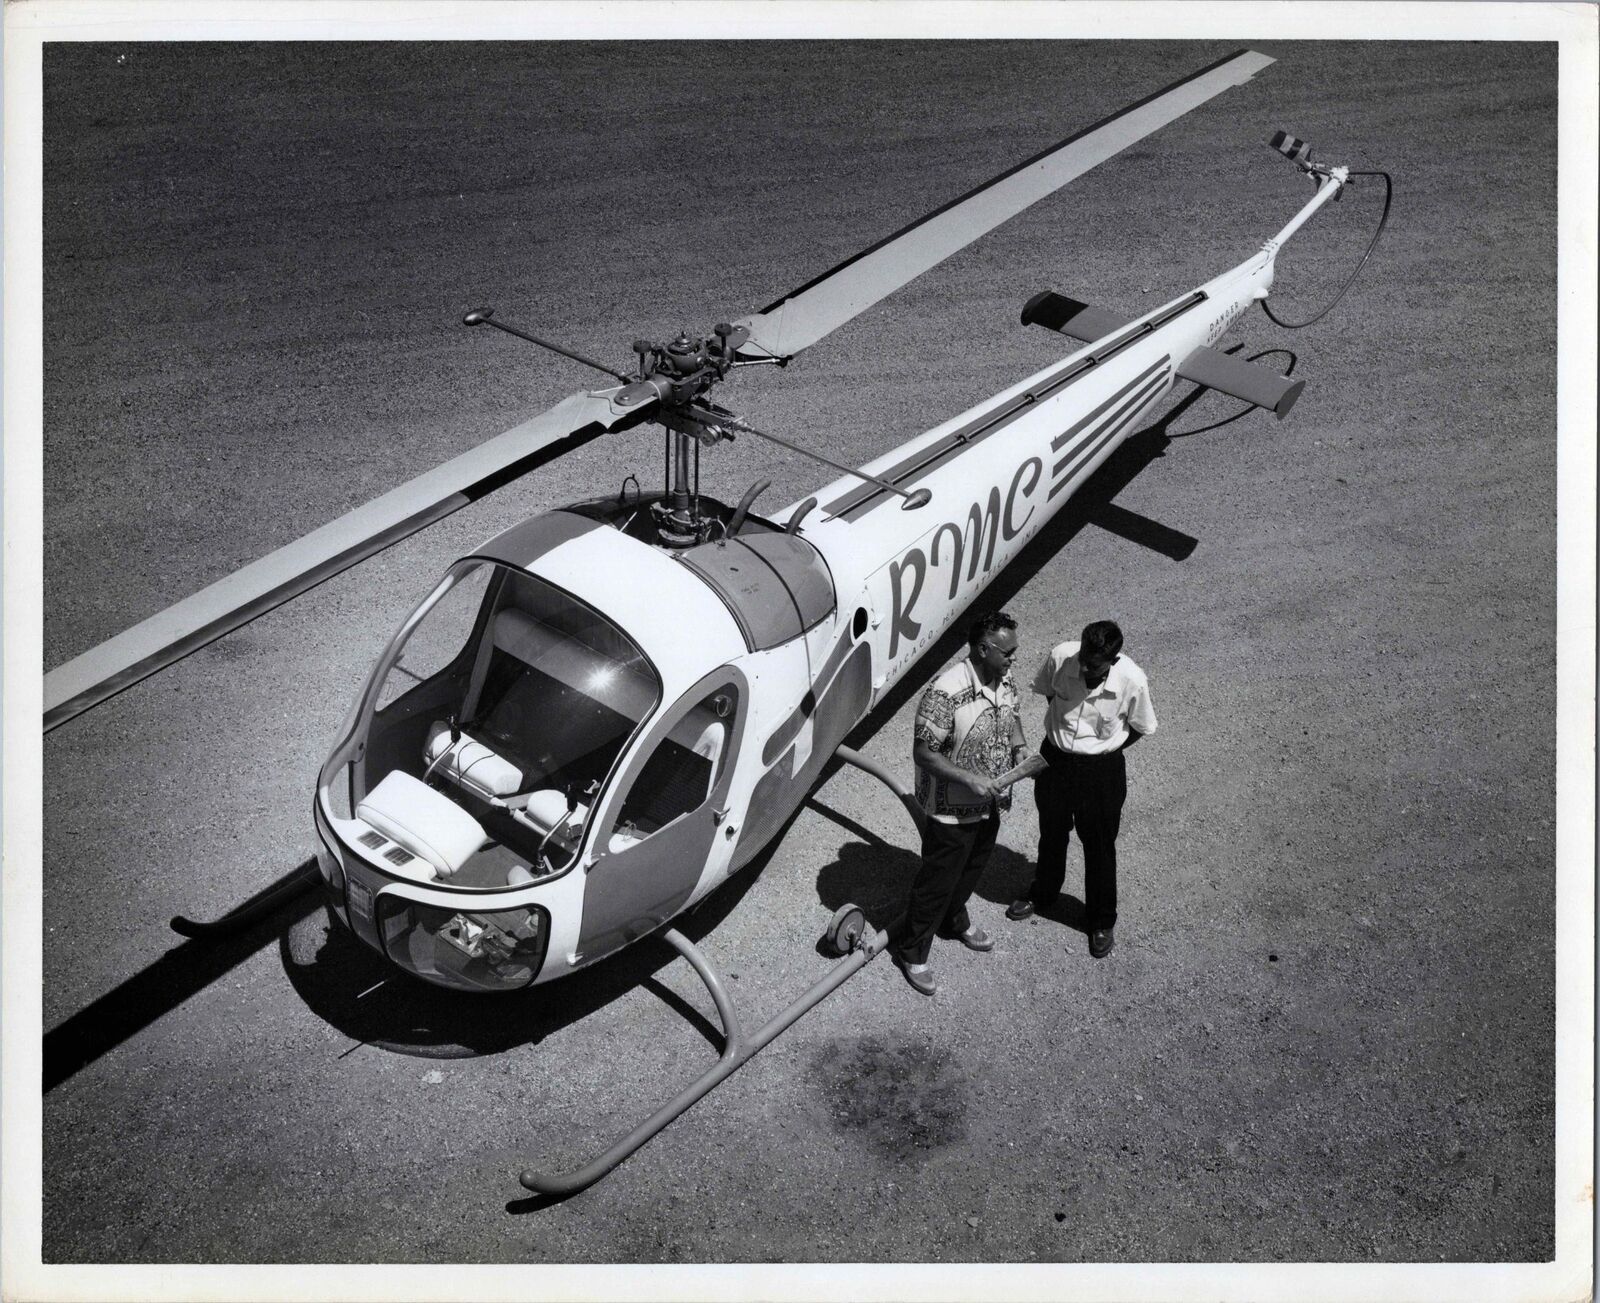 BELL 47 RMC HELICOPTER ORIGINAL MANUFACTURERS PHOTO FACTORY 10